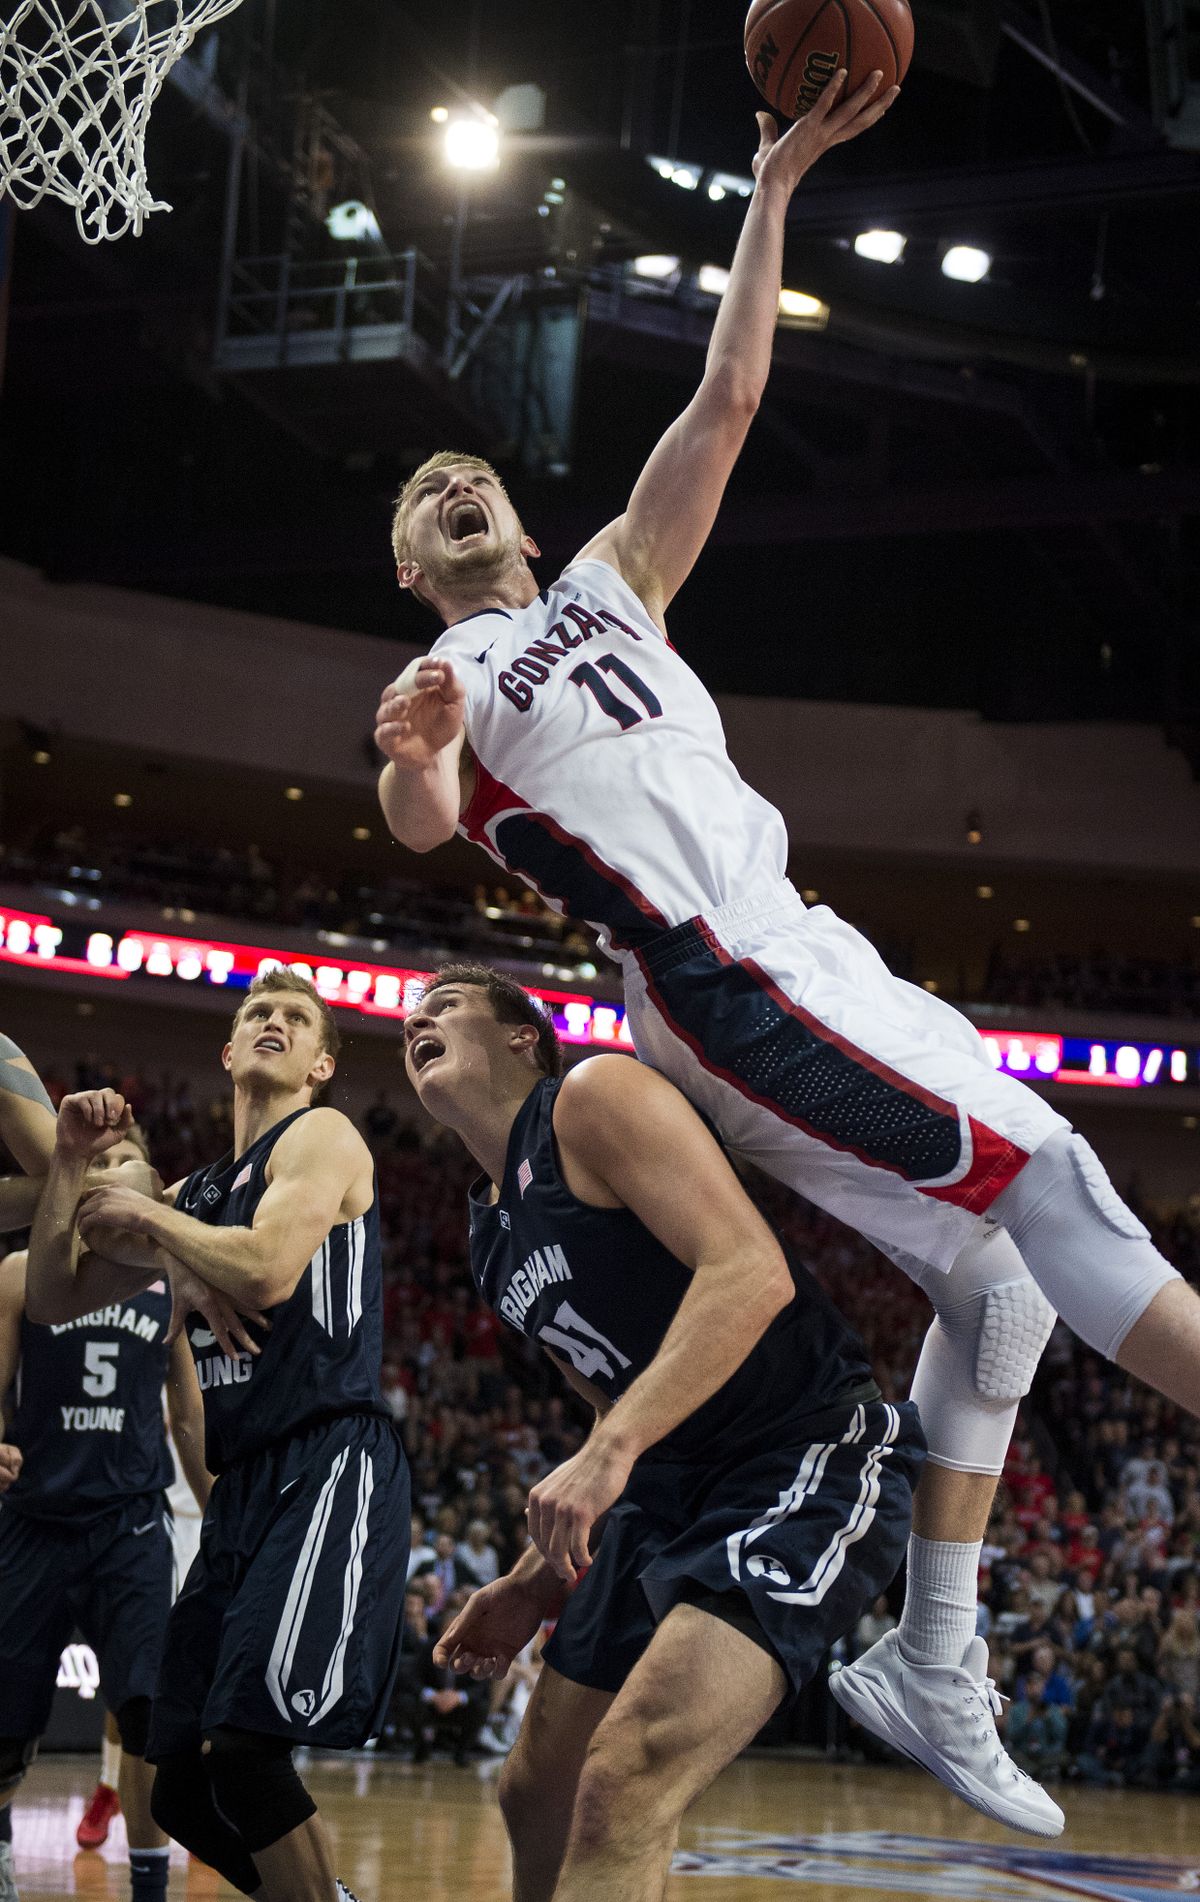 Domantas Sabonis hitches a ride from BYU’s Luke Worthington to get off a shot in WCC title game. (Colin Mulvany)